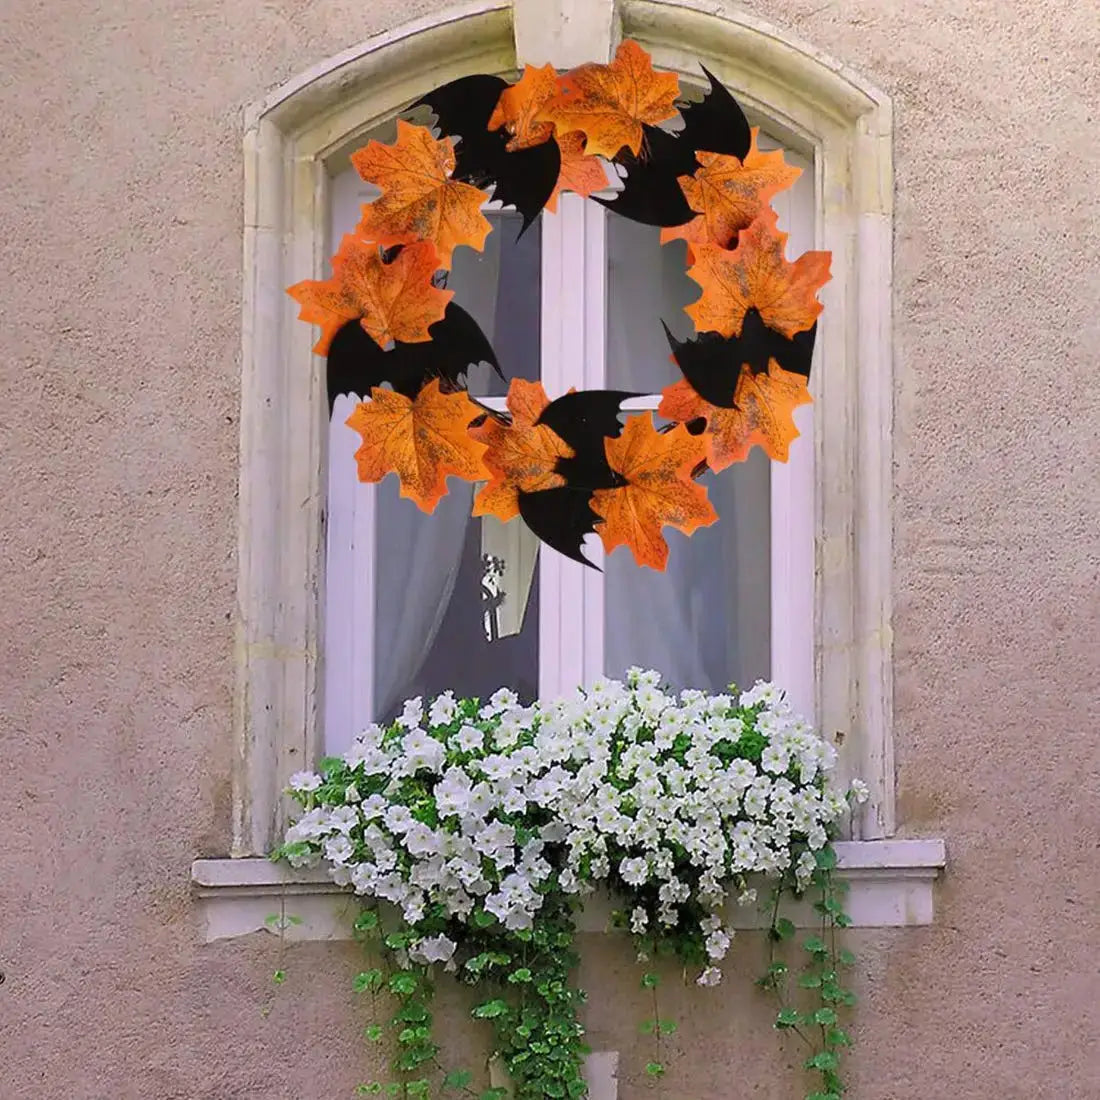 a window with a wreath of leaves and flowers on it